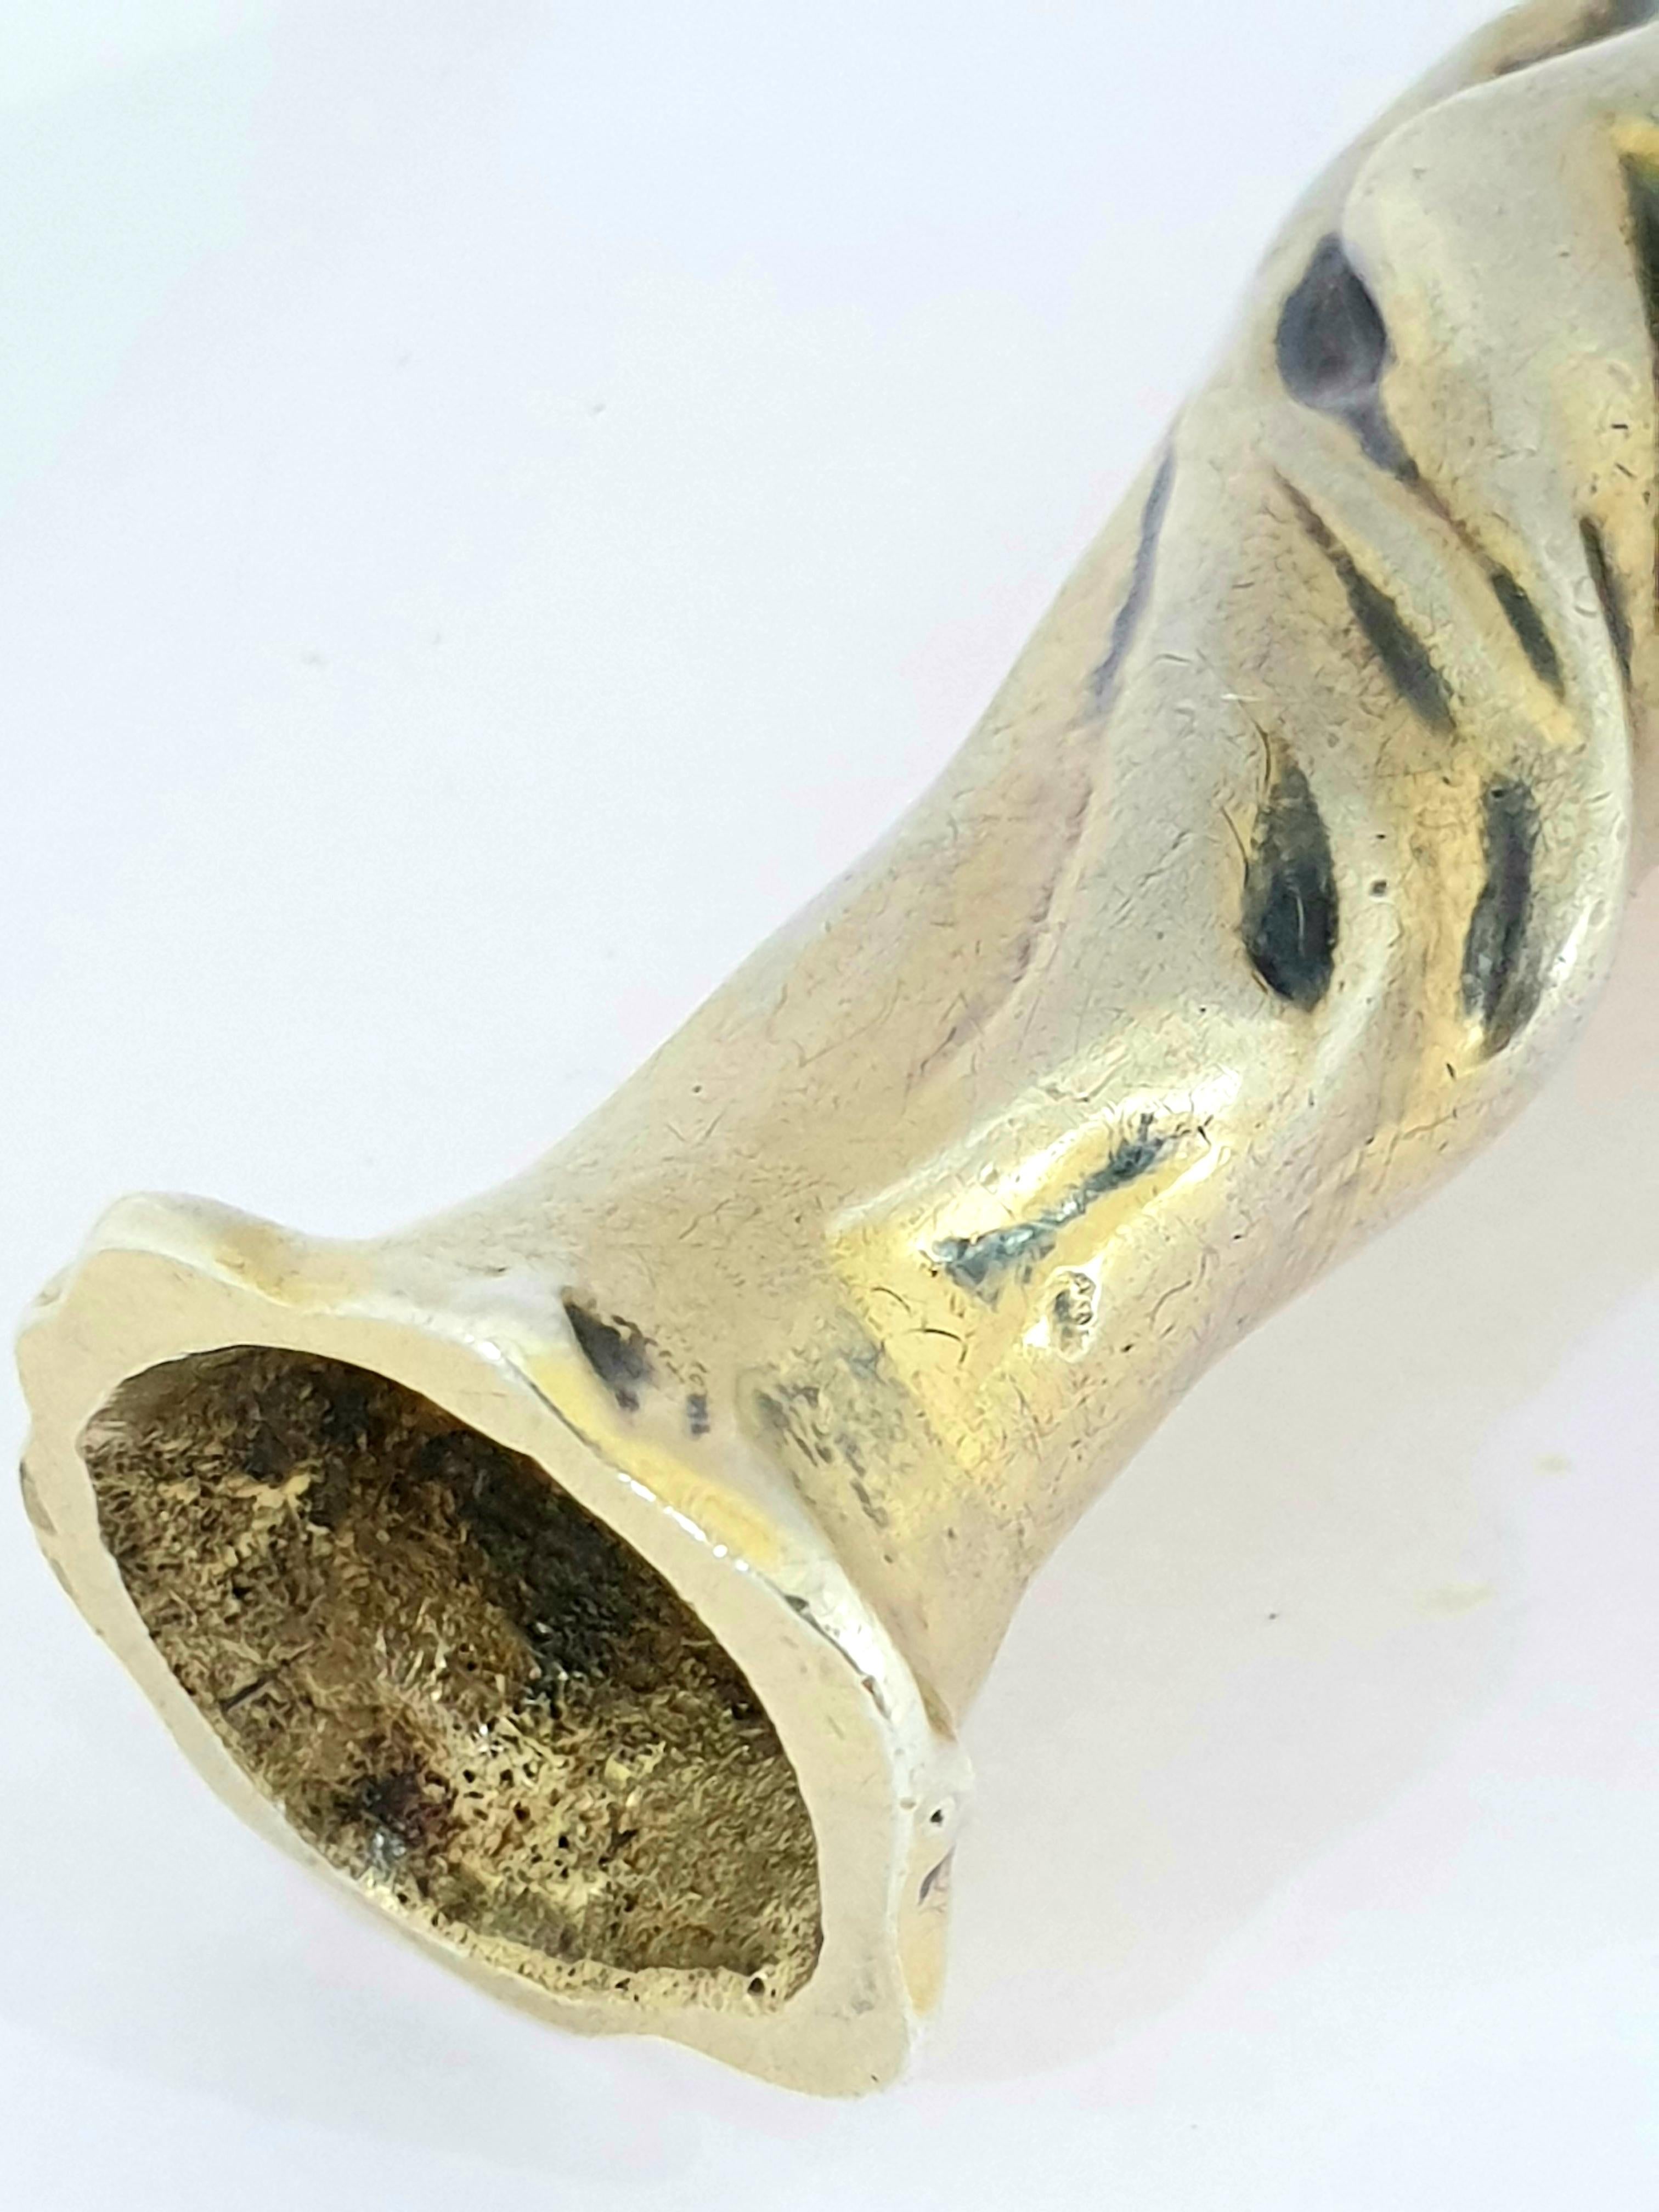 Art Nouveau  umbrella handle made by Janvier Quercia french CIRCA 1900
Silver gilt representing a dancer ,with silversmith and French Minerva marks
10.5 cm. long   weight:116.5gr